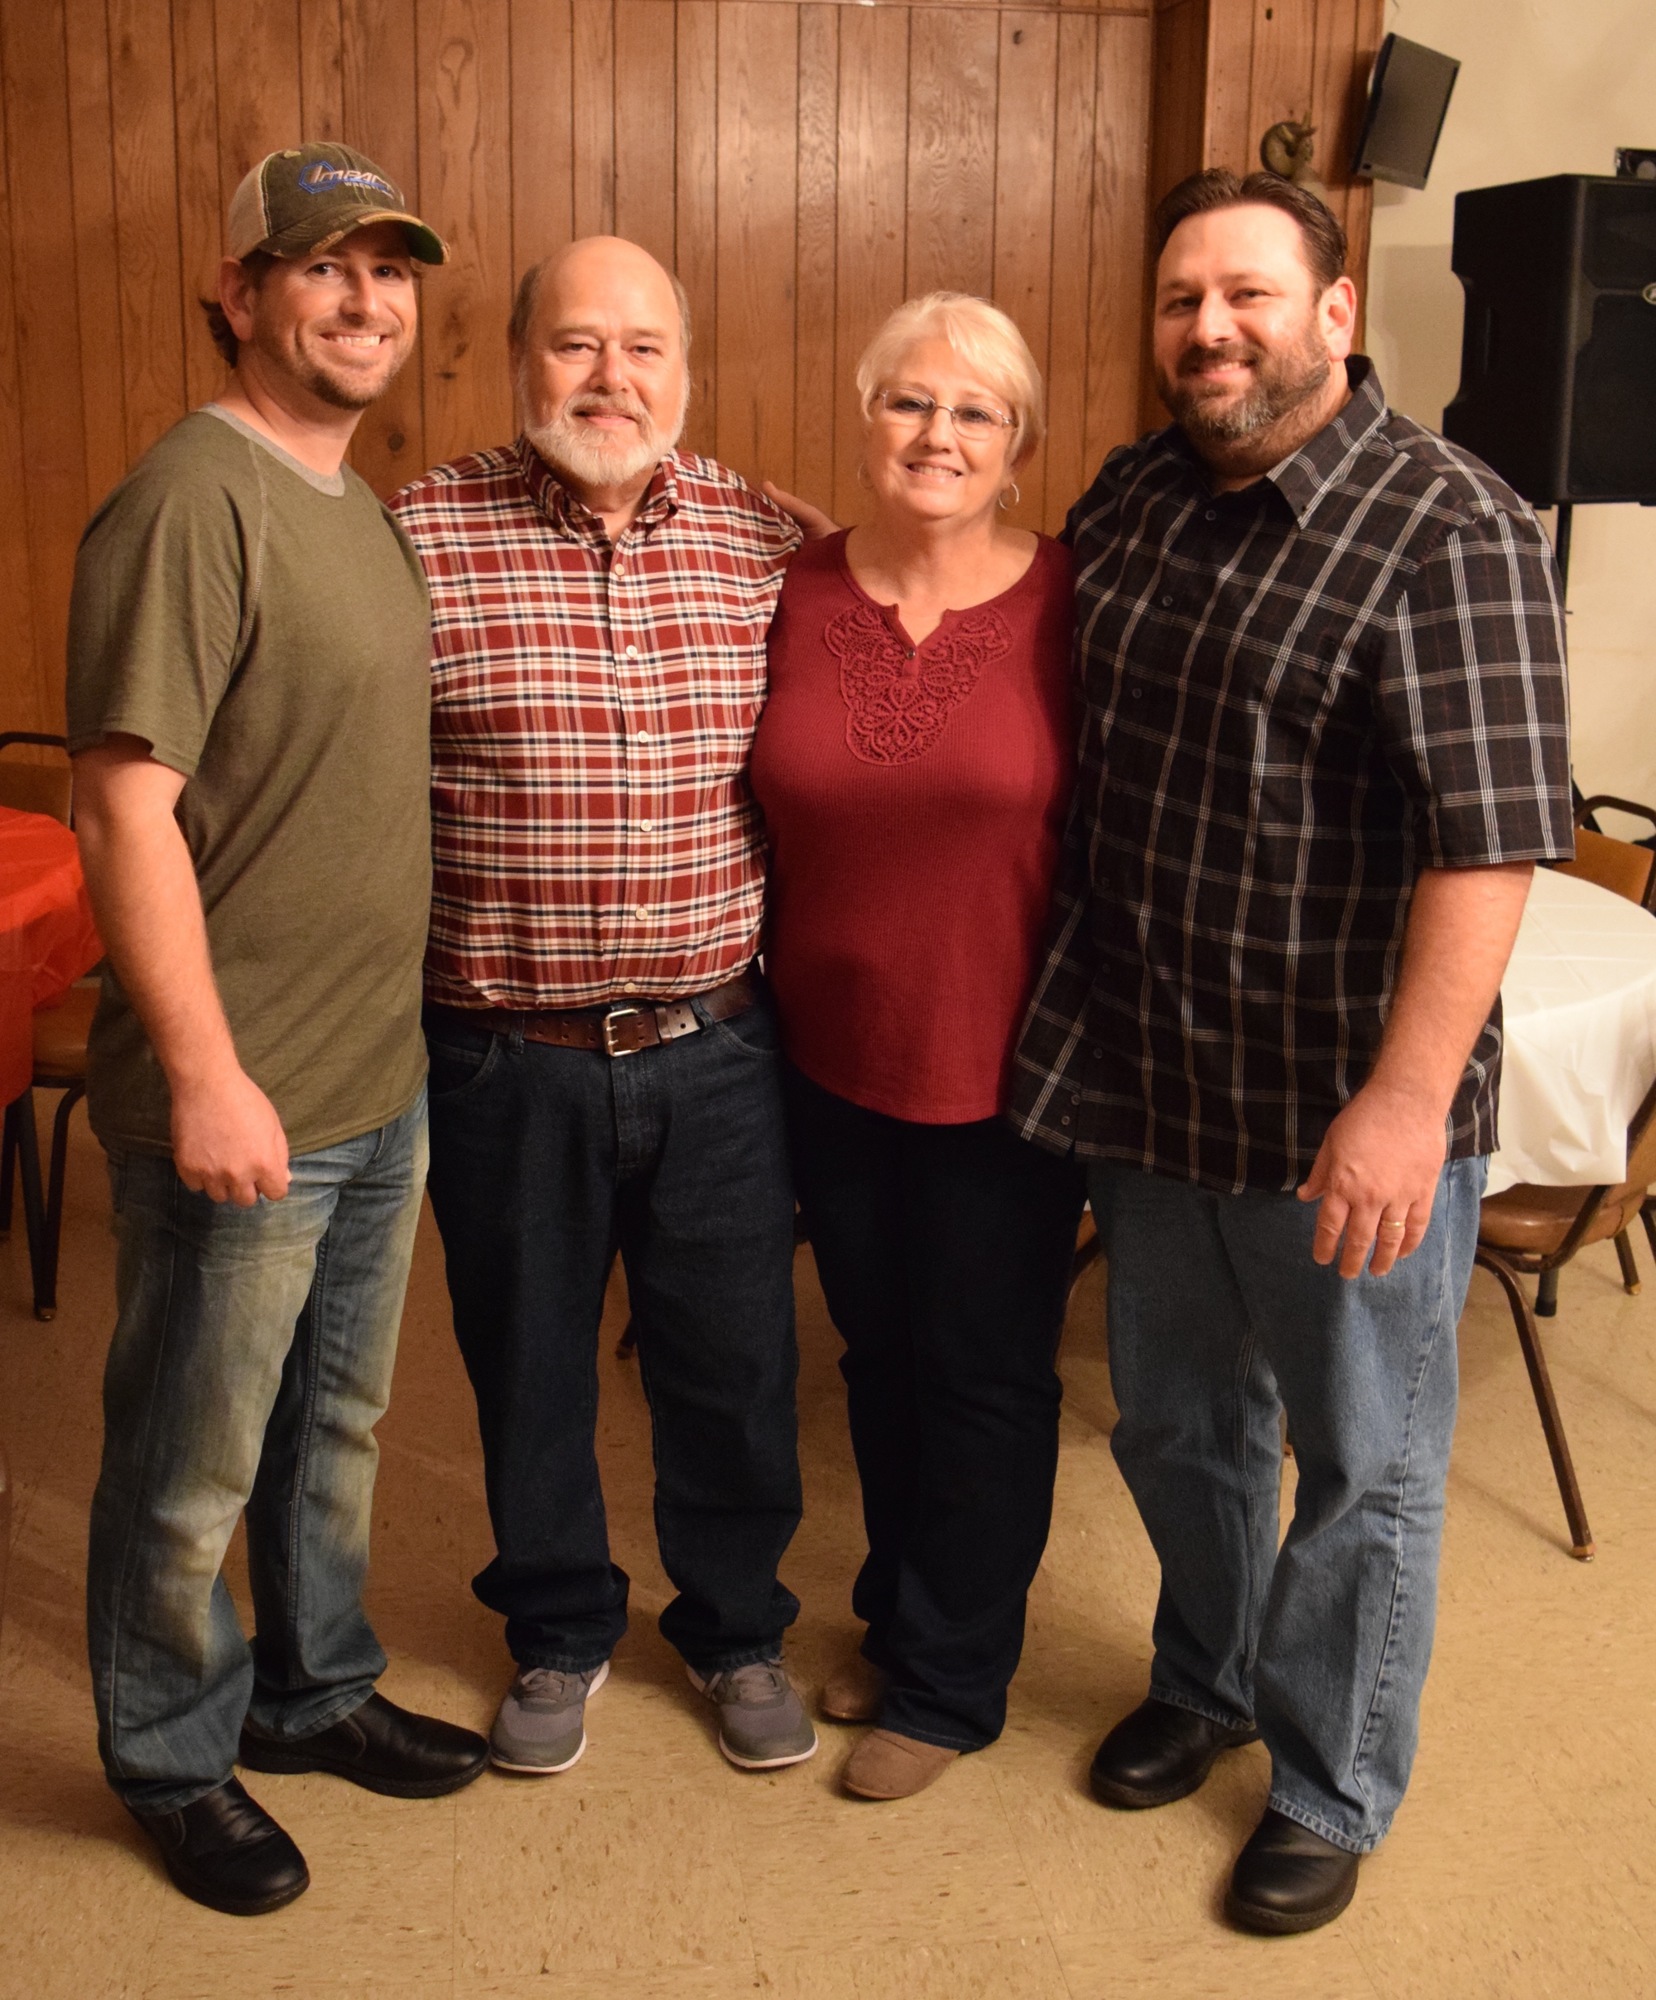 Donald Wise, second from left, loves to spend time with his wife, Candy, and sons Brent, left, and Heath.